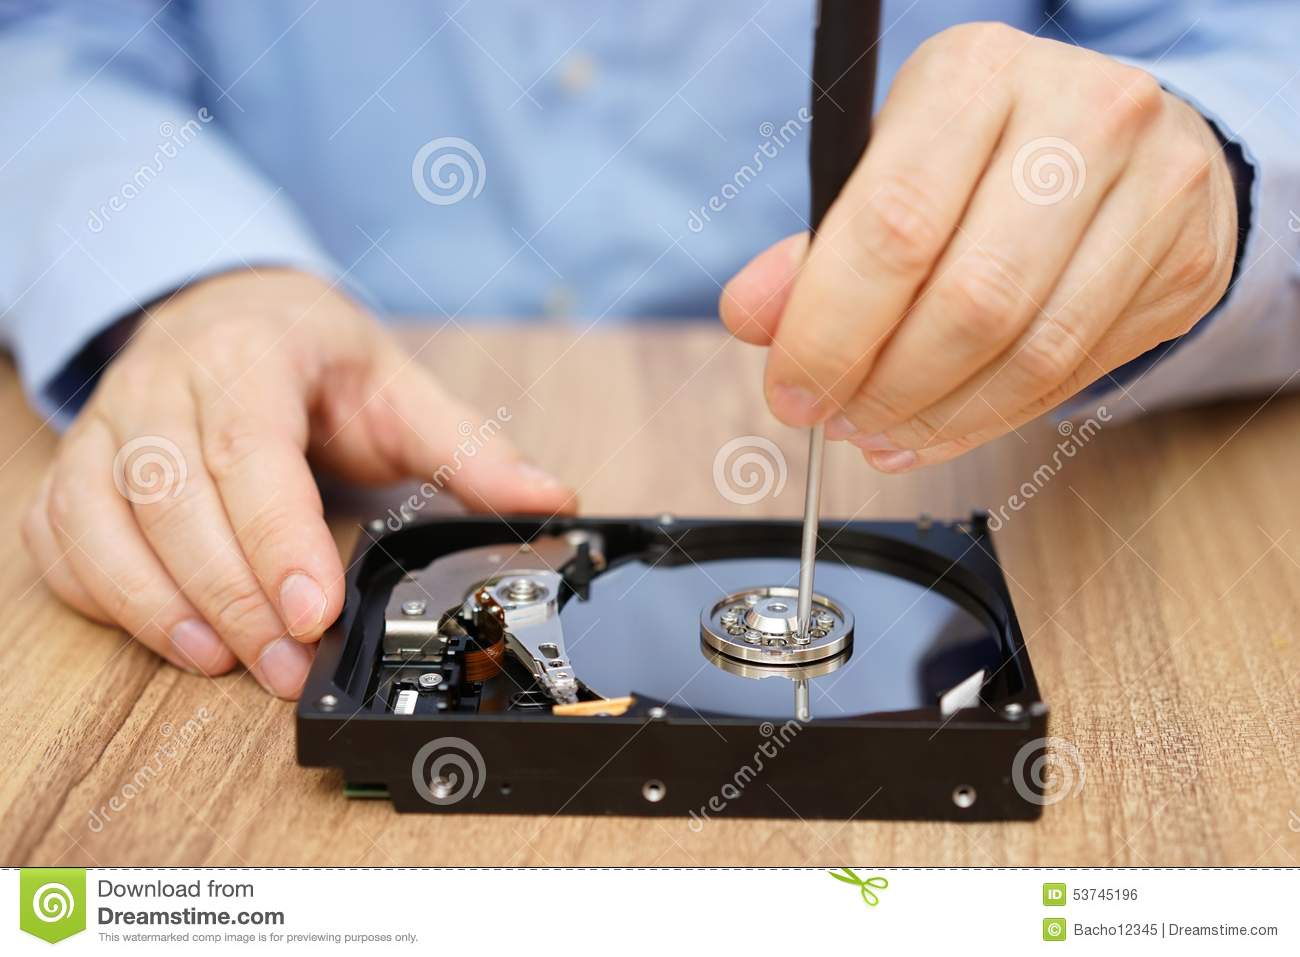     Lost Data From Failed Hard Disk Drive Stock Photo   Image  53745196